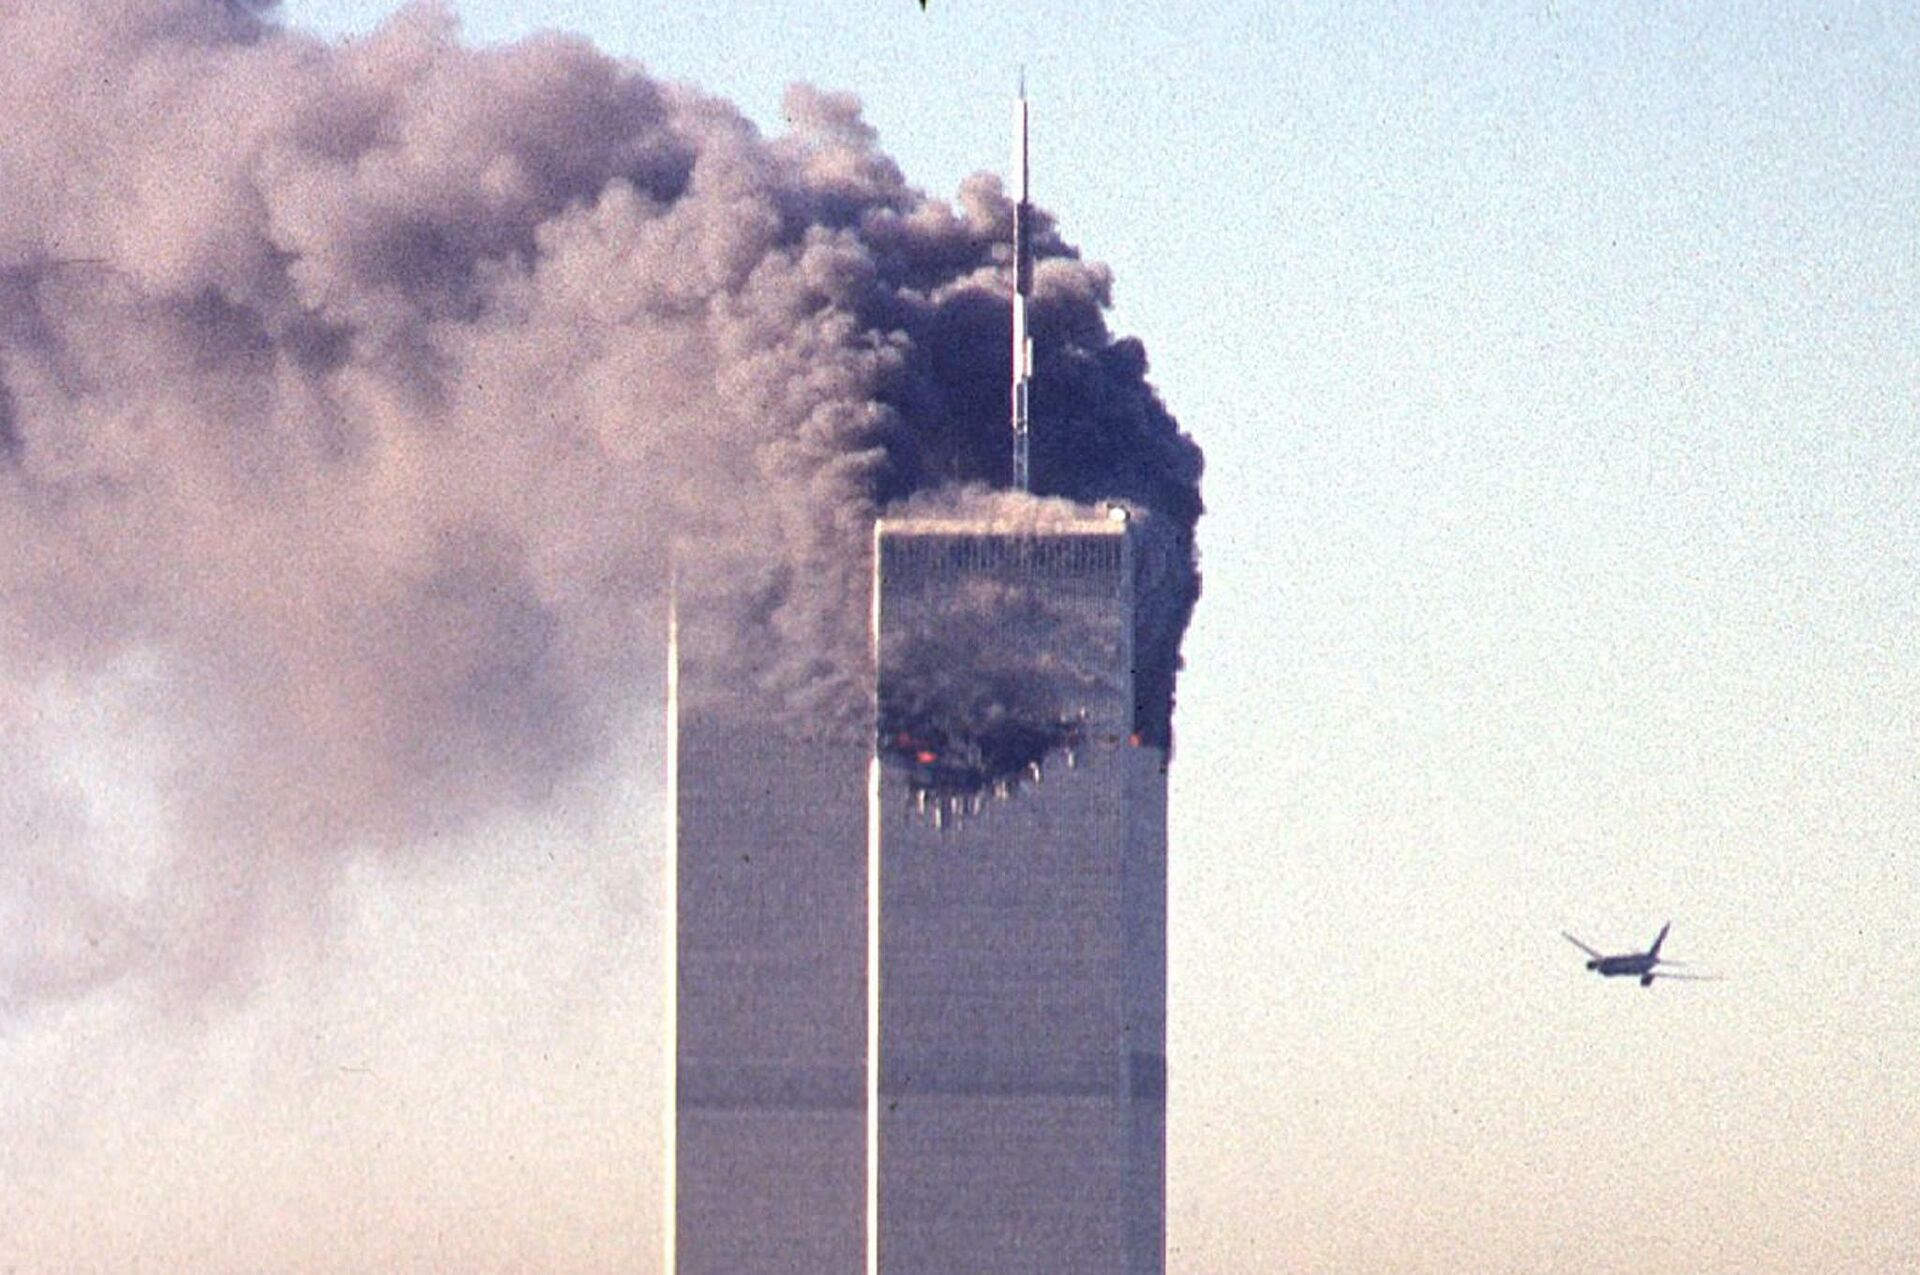 (FILES) In this file photo taken on September 11, 2001, a hijacked commercial aircraft approaches the twin towers of the World Trade Center shortly before crashing into the landmark skyscraper in New York.  - Sputnik International, 1920, 11.09.2021